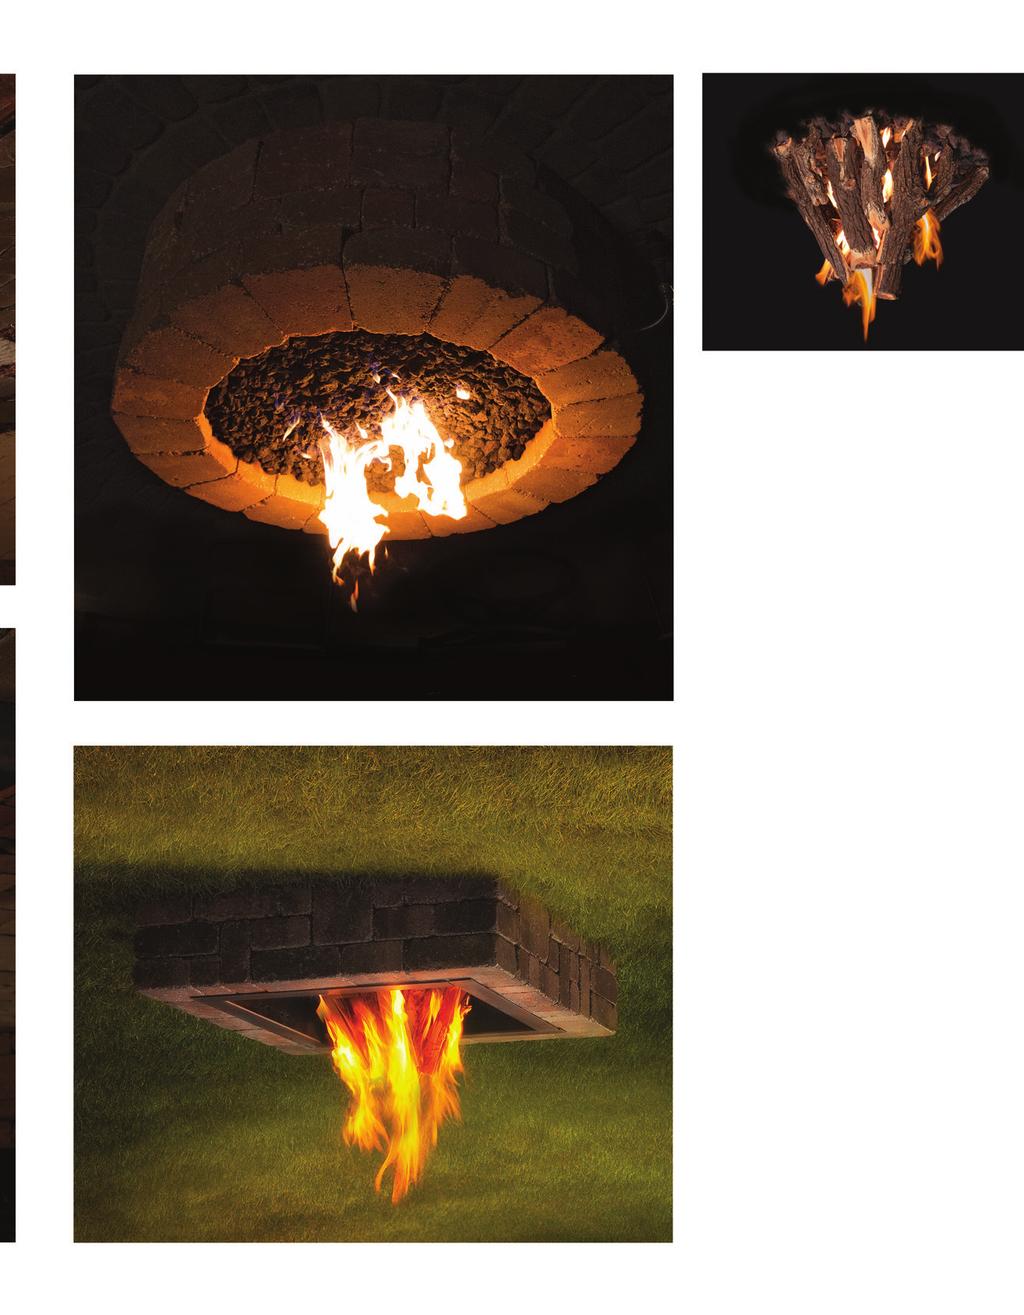 No matter the locale, there will be cool evenings to enjoy the warmth of a backyard fire. A Necessories Fire Ring/Pits adds charm to any backyard design.